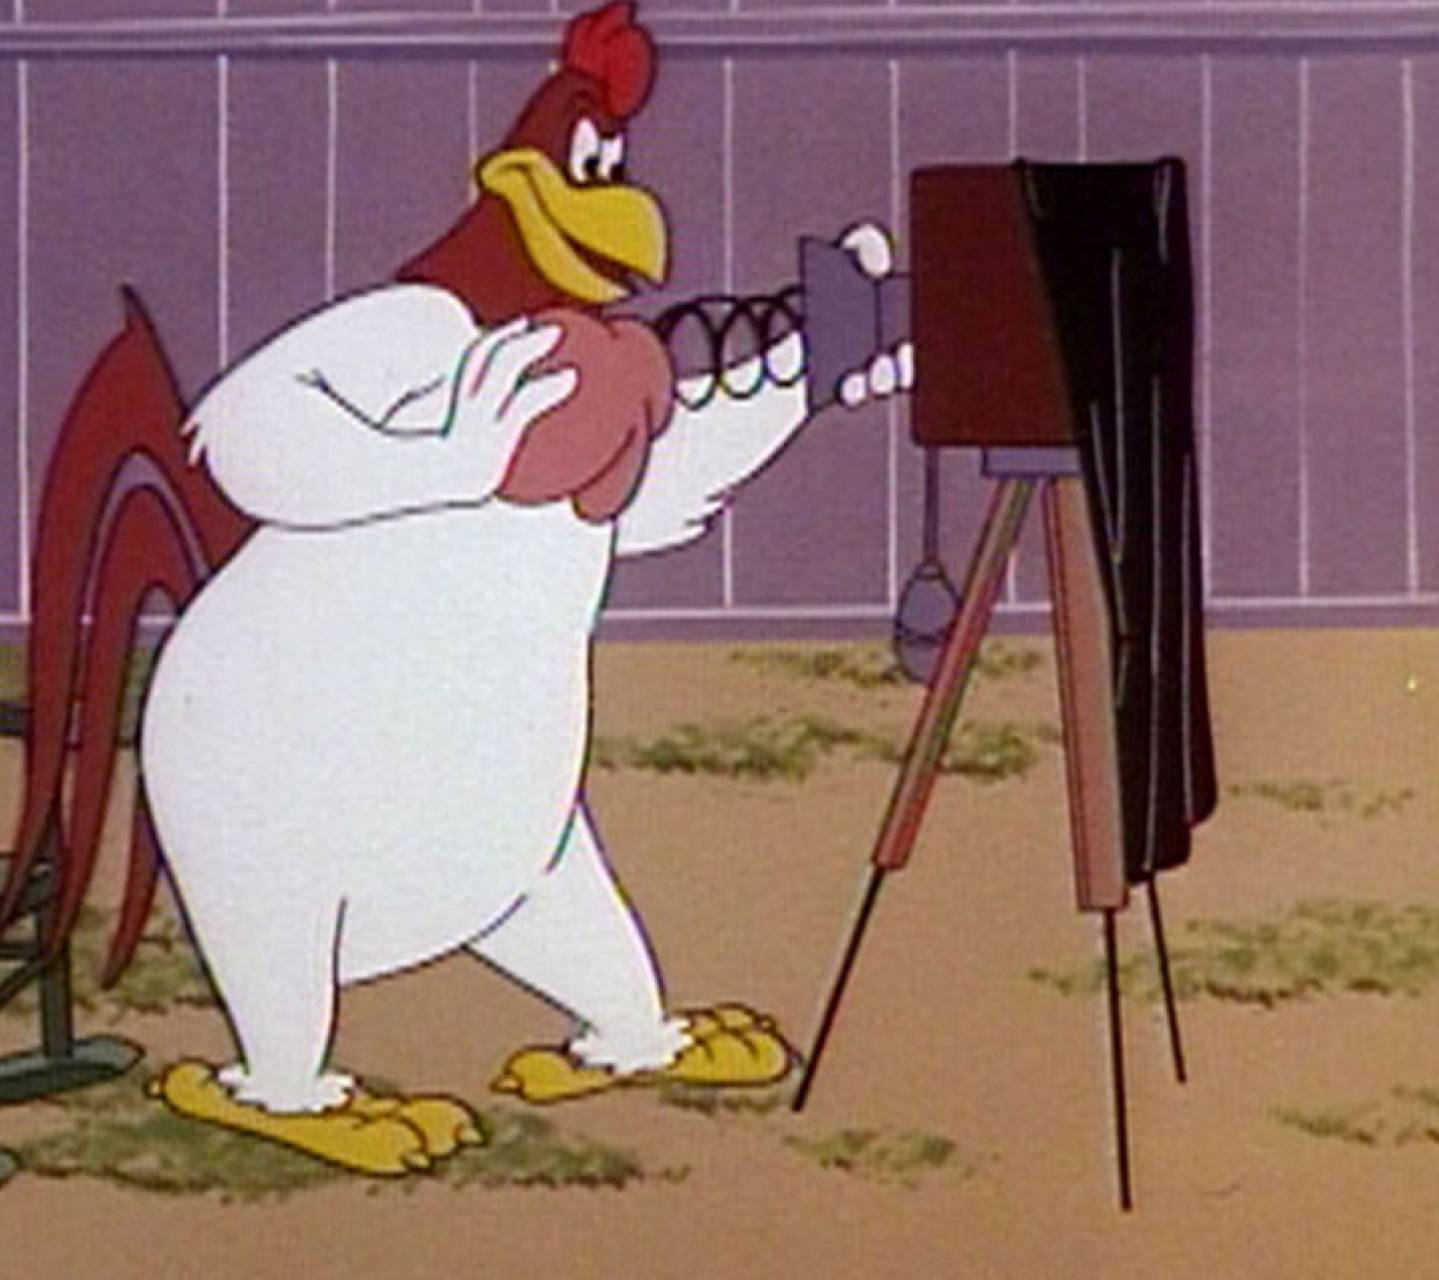 Foghorn Leghorn, the witty rooster. Wallpaper